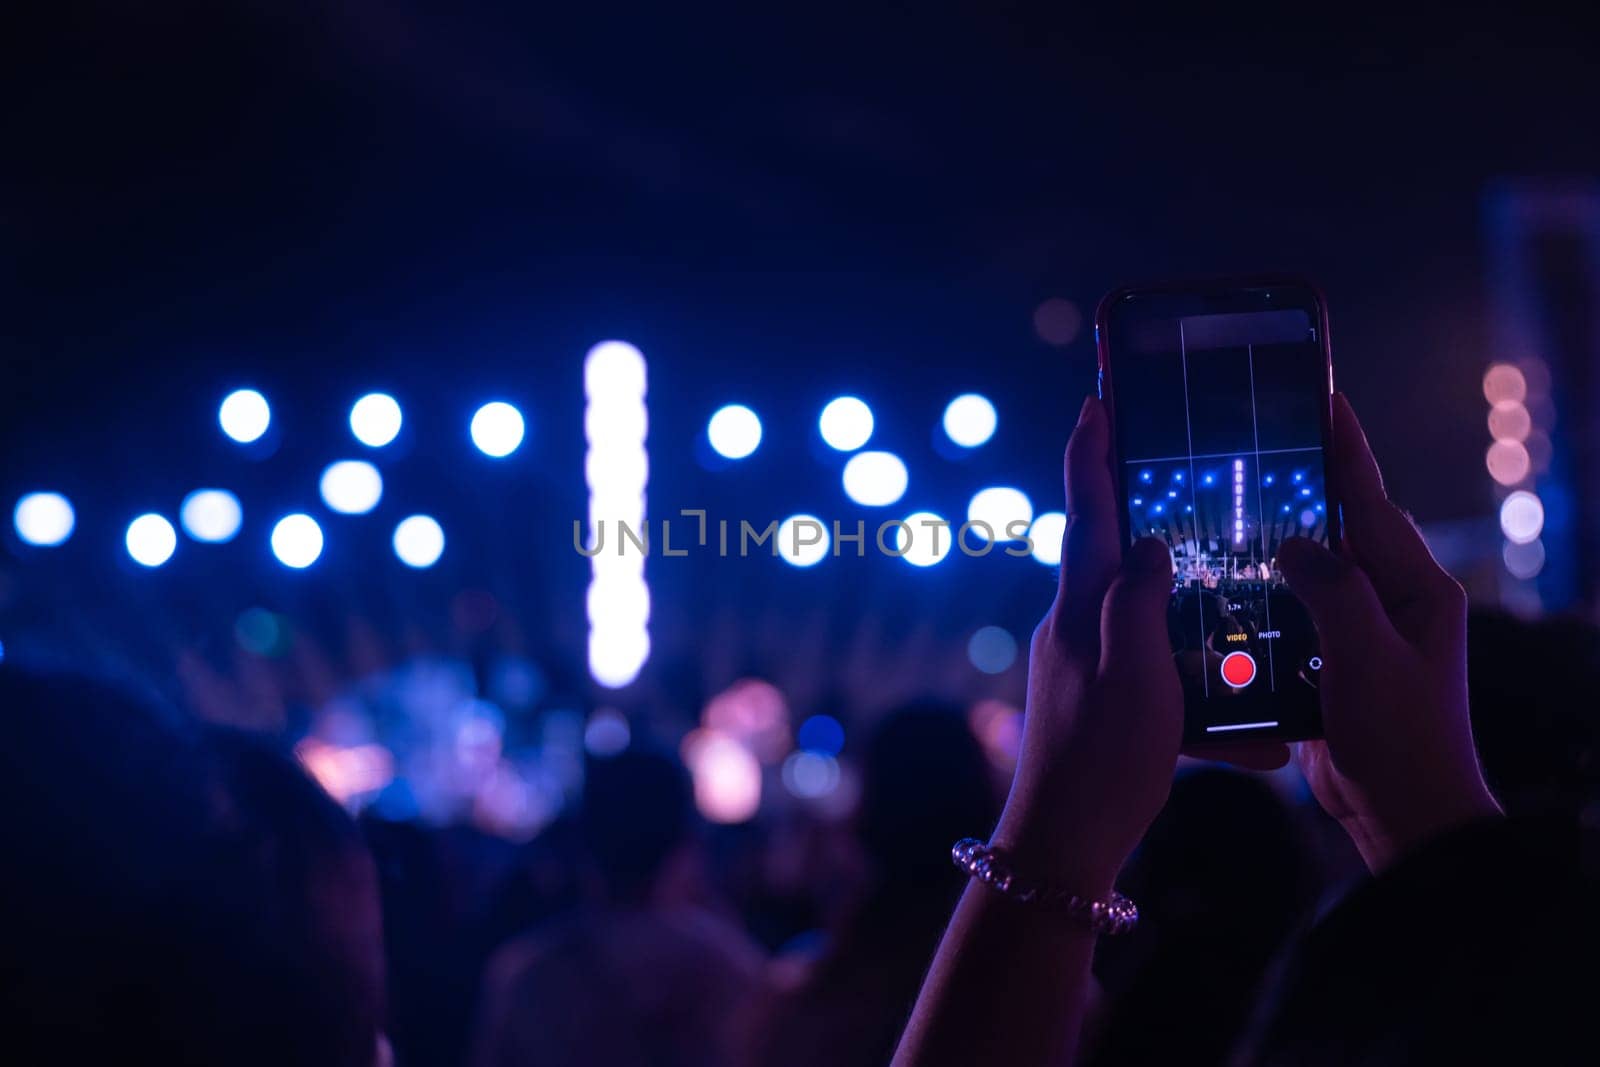 An electrifying concert festival during main event as cheering unrecognizable crowd gathers in front of brightly lit stage at night. lens flare adds to fun capturing excitement of music festival.